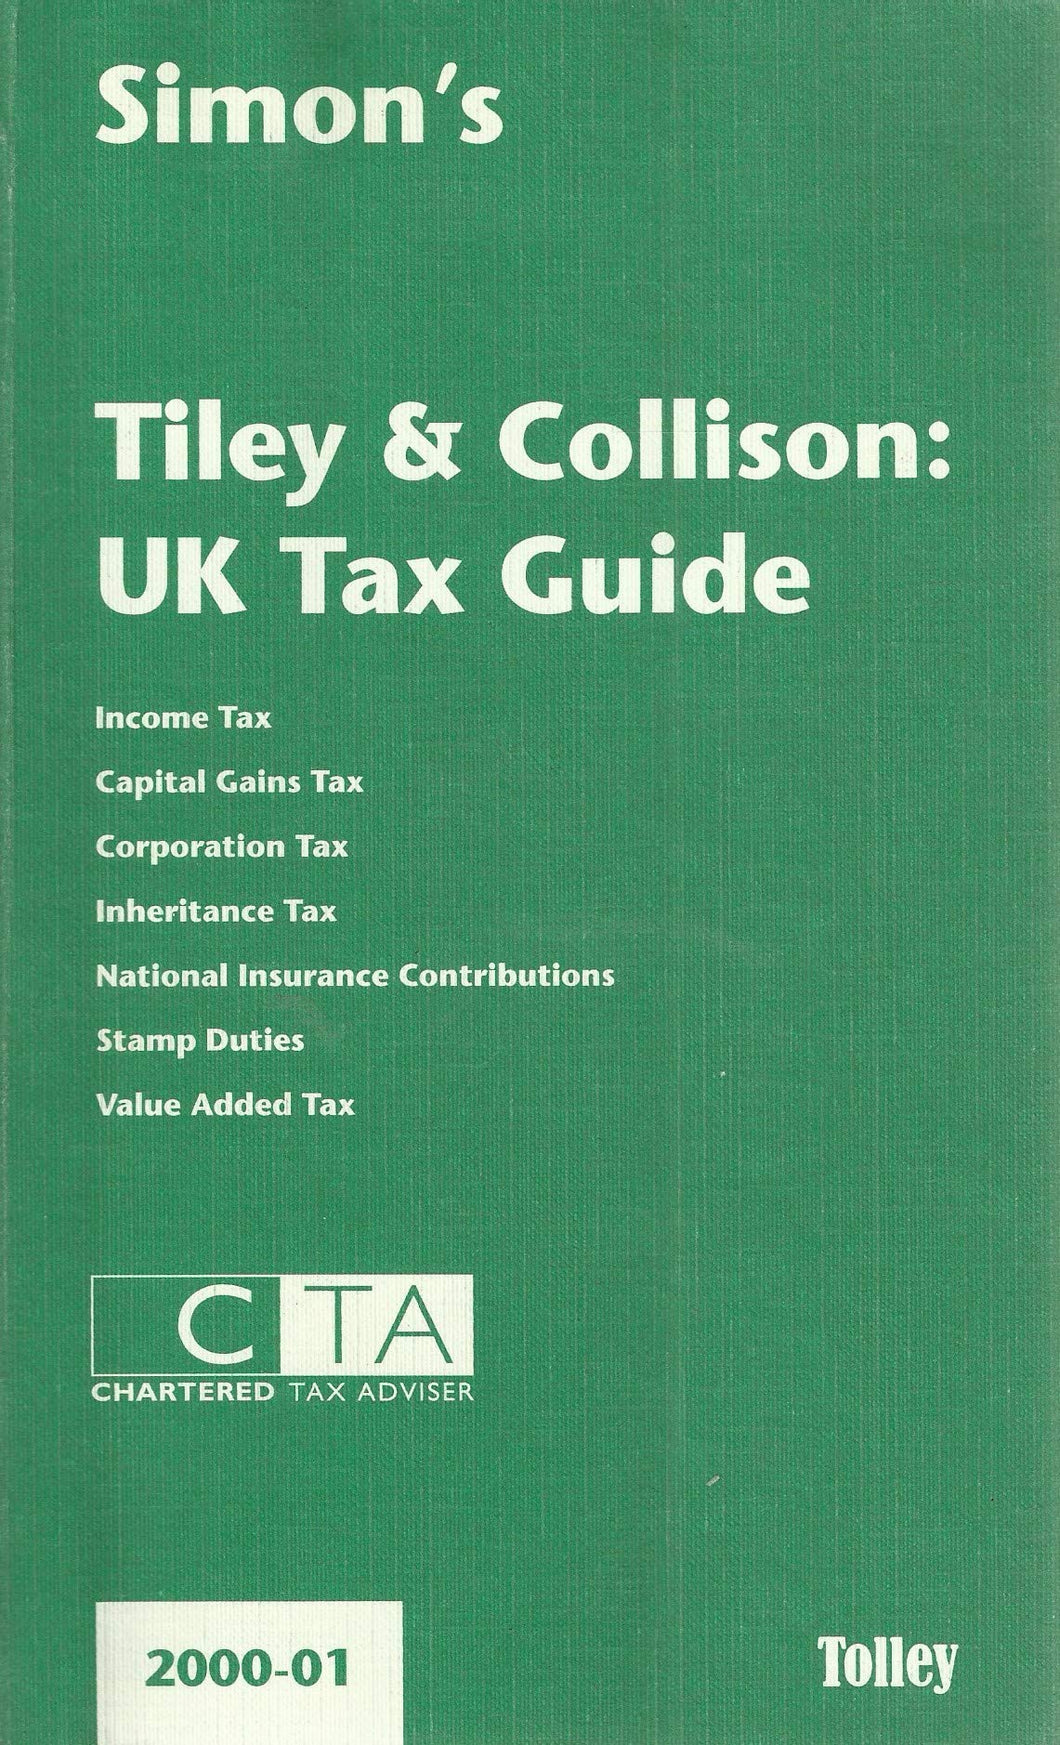 Tiley and Collison's UK Tax Guide